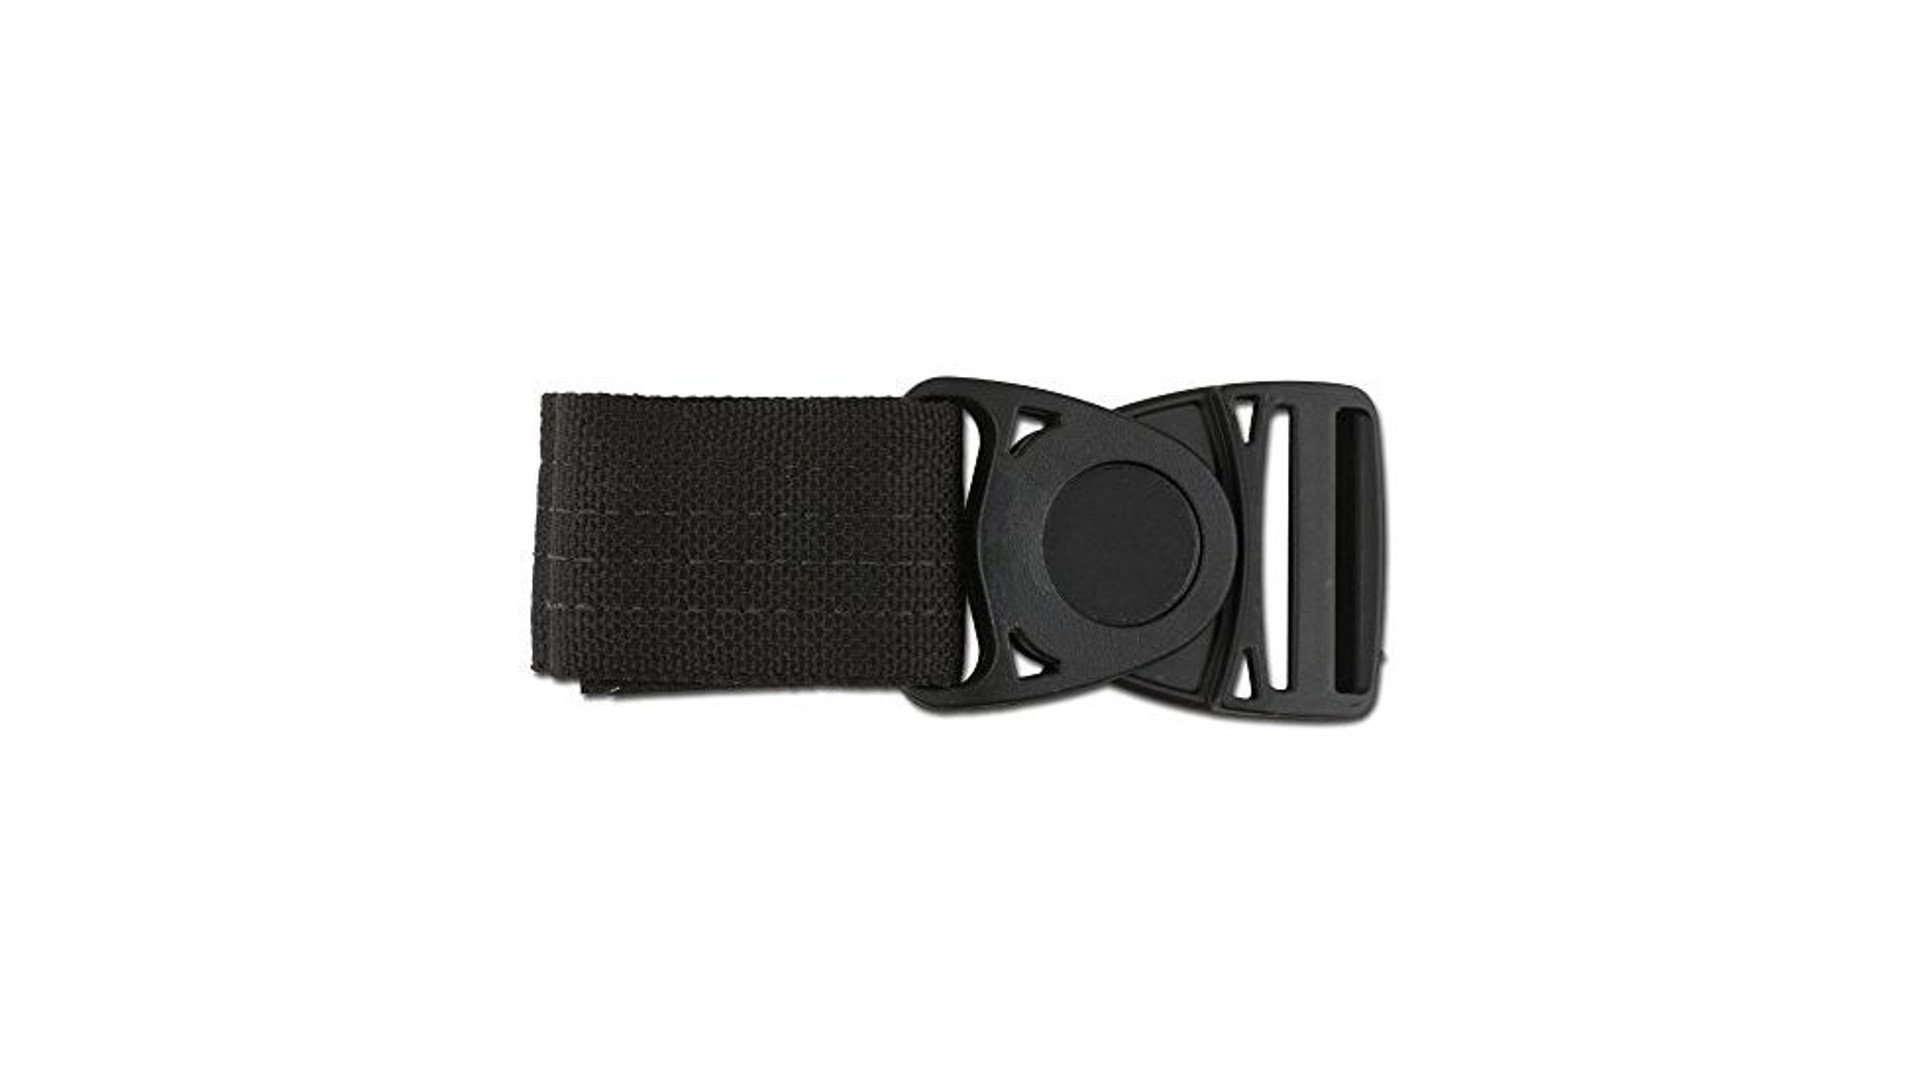 Slide and Quick Release Buckles